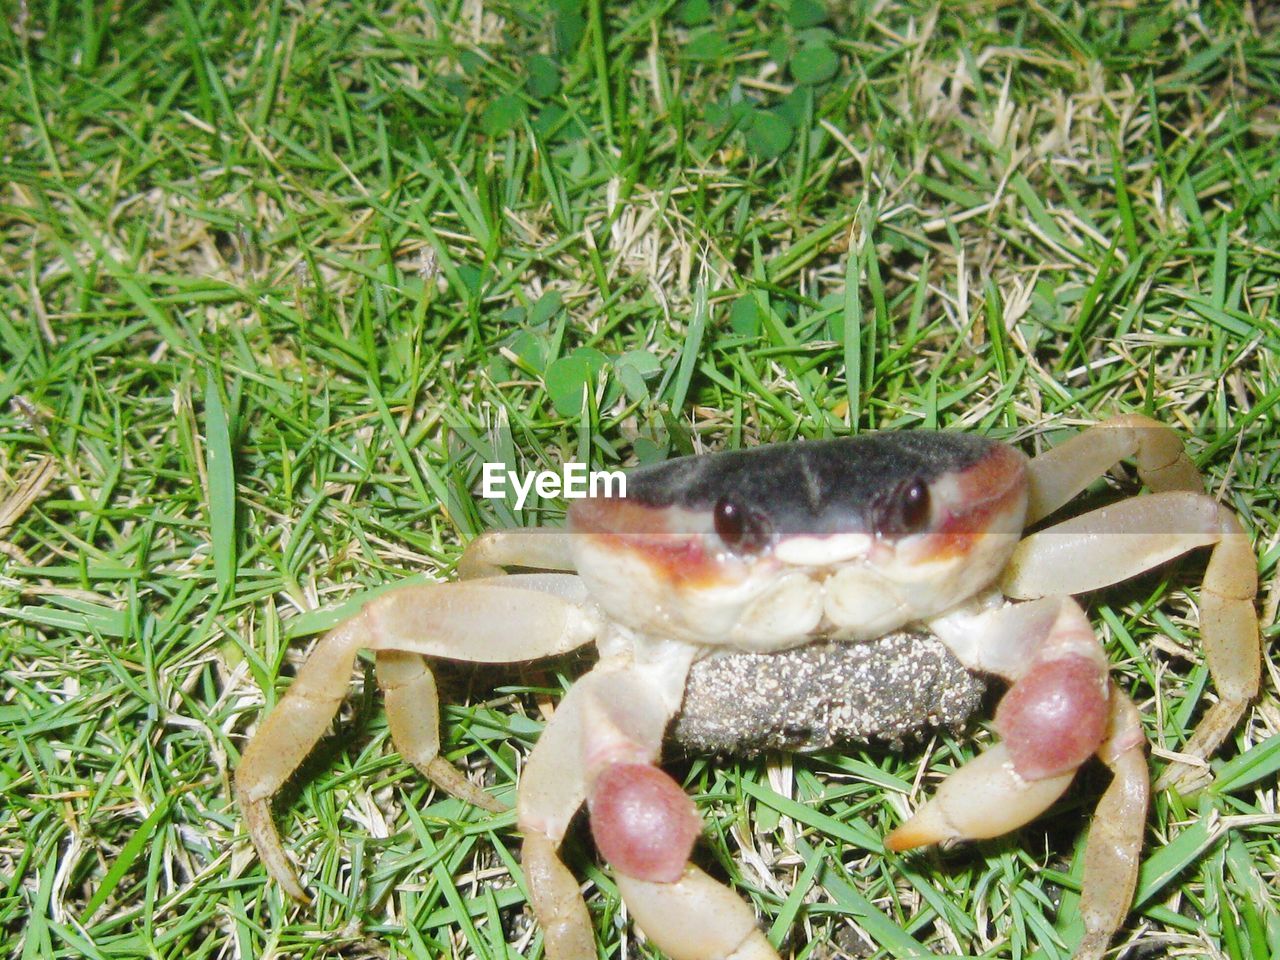 CLOSE-UP VIEW OF CRAB